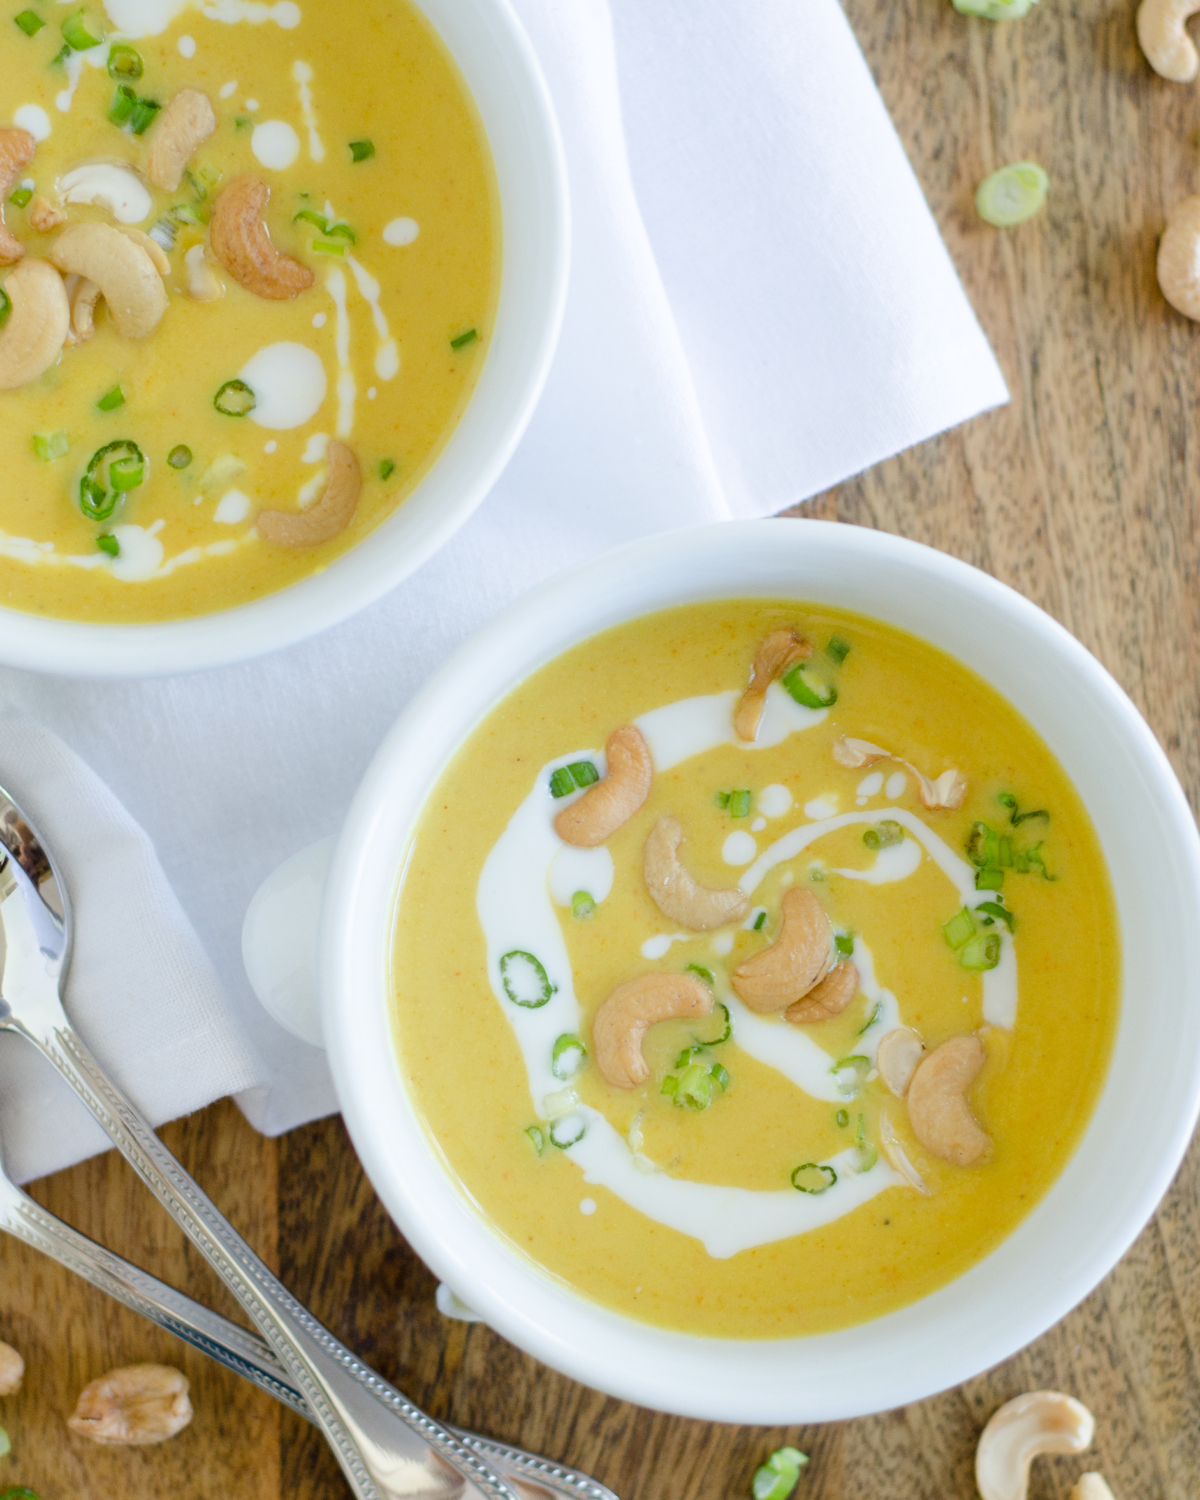 Creamy and delicious curried cauliflower soup recipe that is Whole 30 and Paleo!